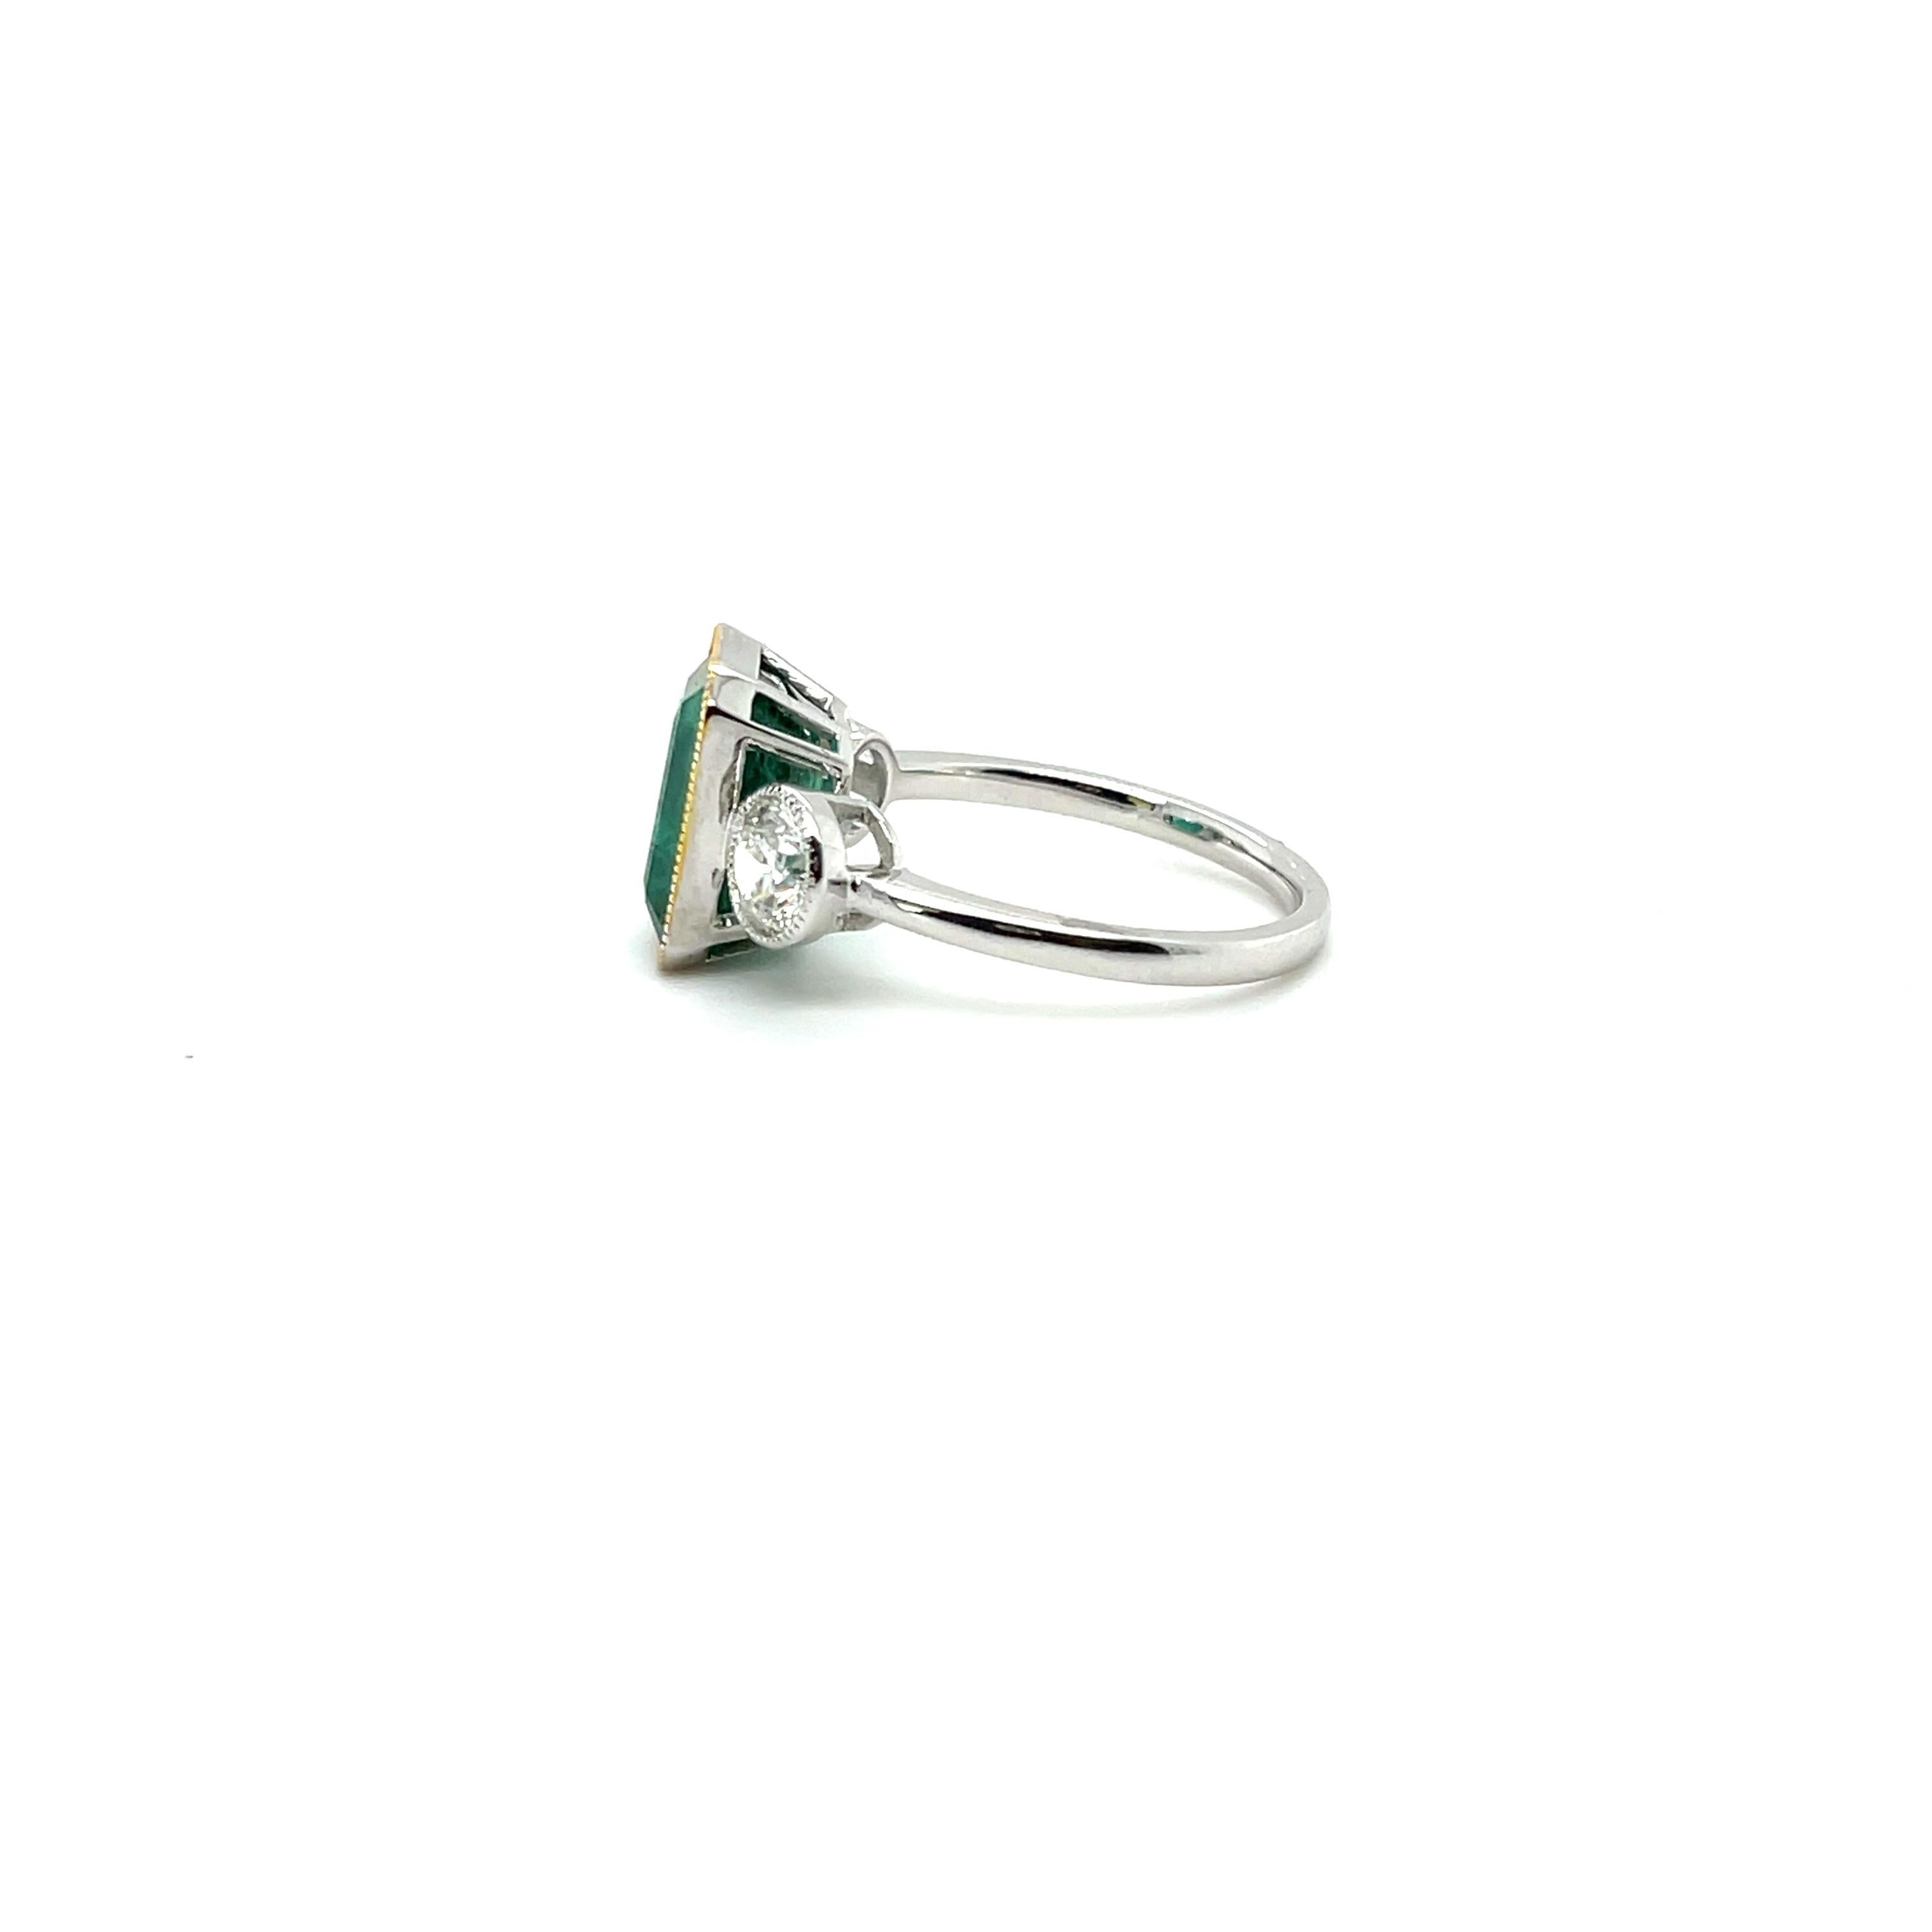 An absolutely gorgeous Emerald, gorgeous colour, Lustre and Transparency, featuring 2 stunning diamonds , gorgeously crafted in platinum , complimented by a polished finish design. 


One ladies - platinum three stone ring, narrow, half round,